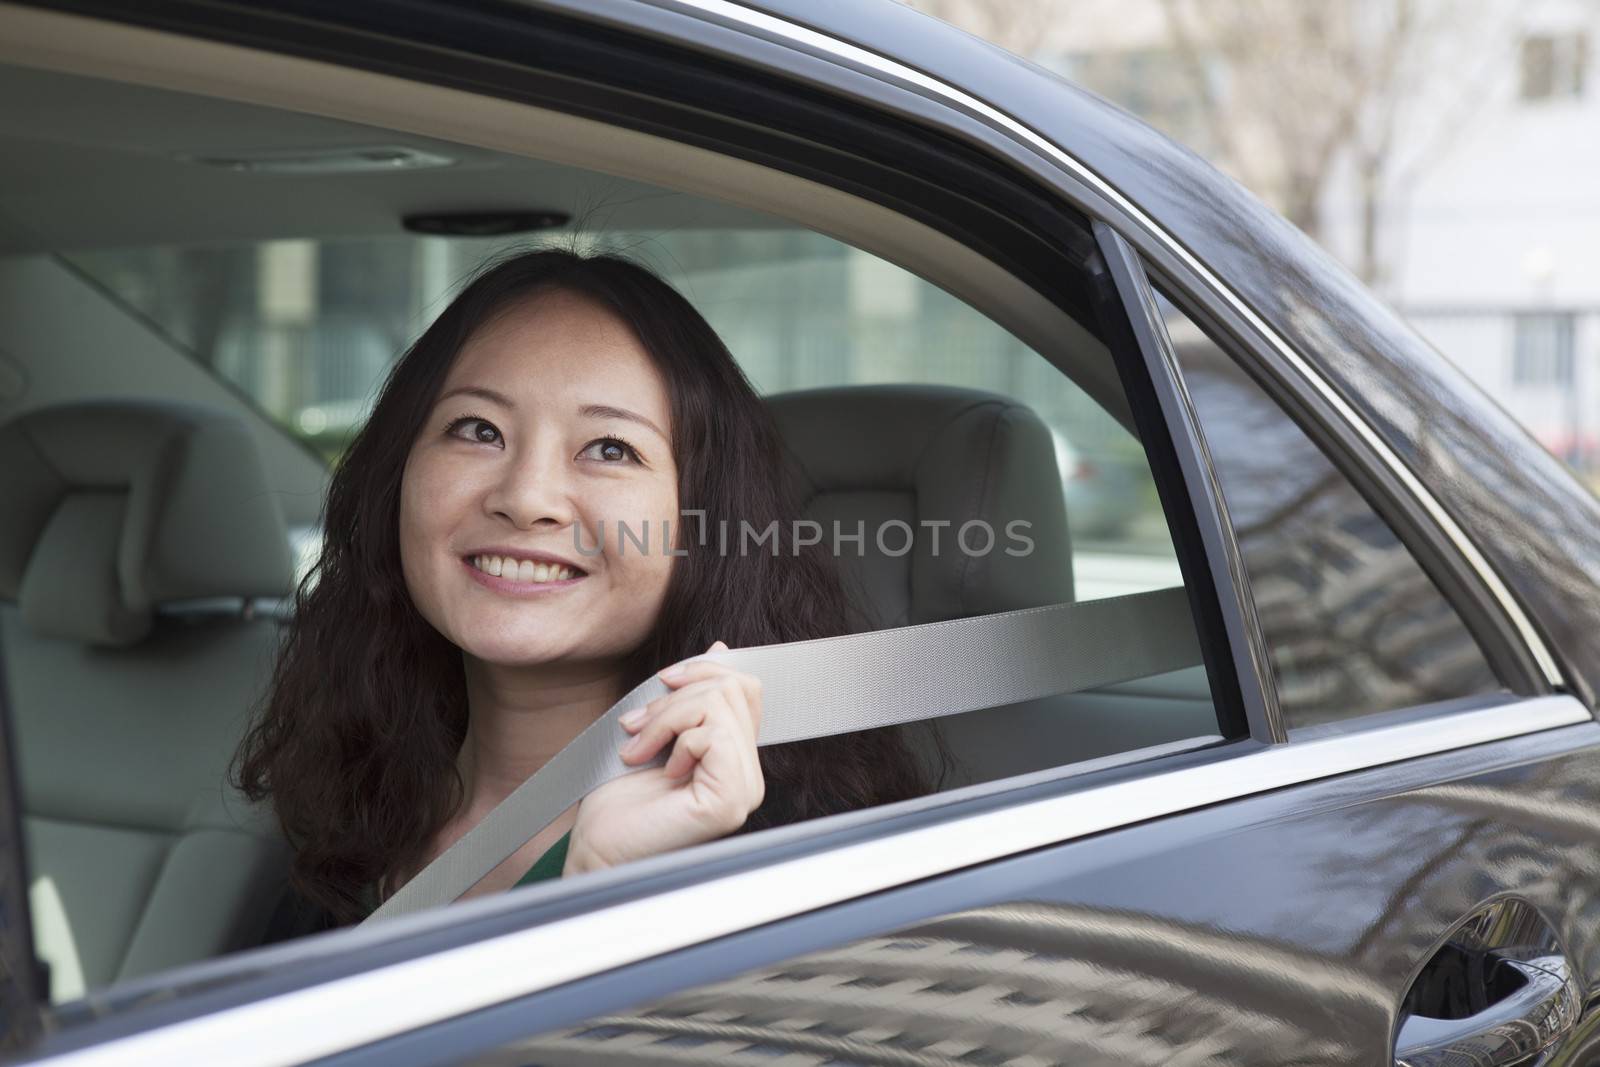 Young women in back seat of car fastening seat belt.